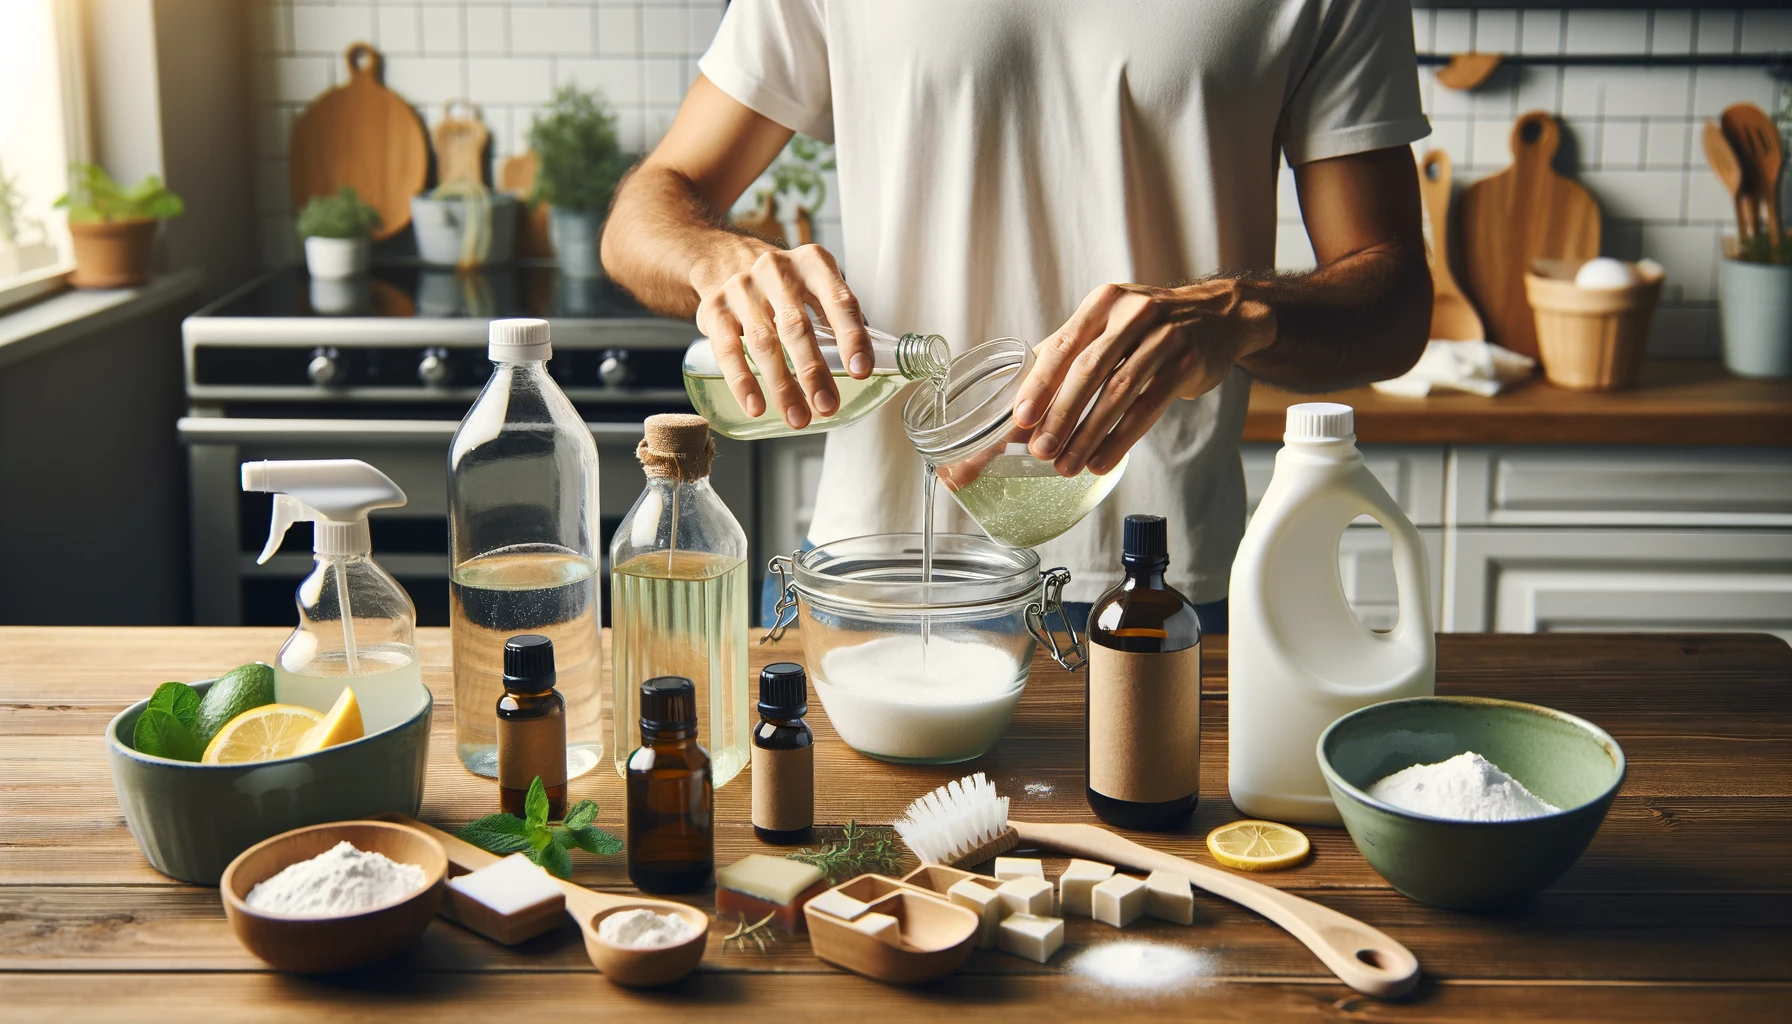 An individual in their kitchen, mixing ingredients to make natural cleaning products